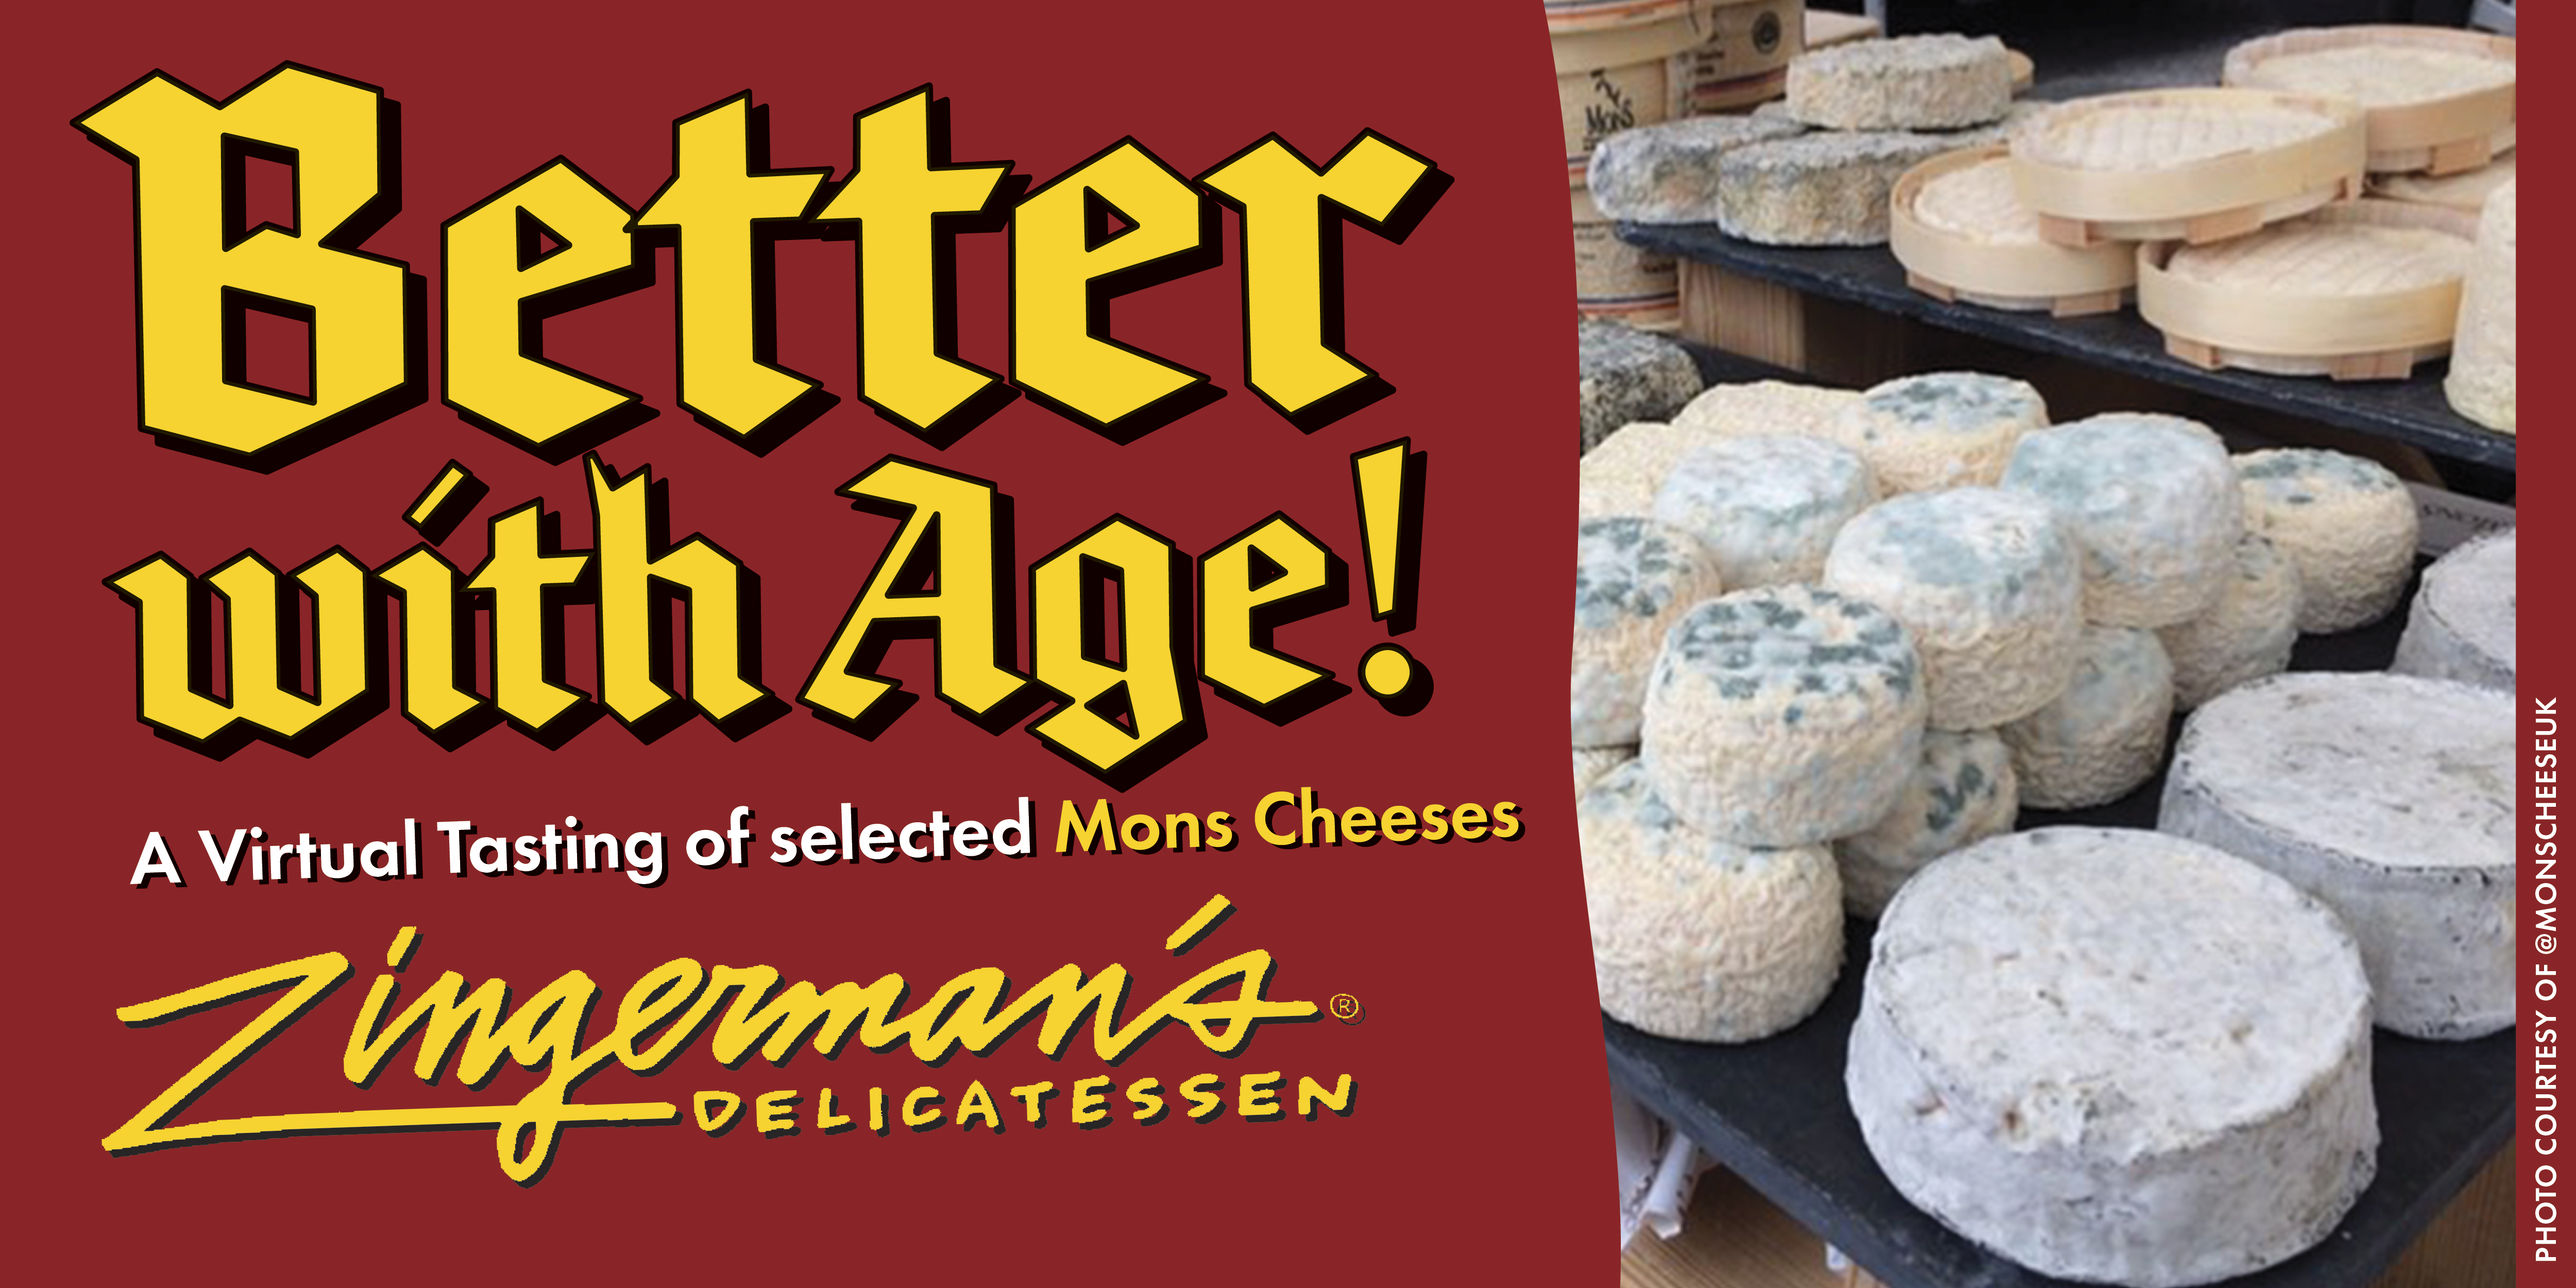 Better with age!–A Virtual Tasting of Selected Mons Cheeses